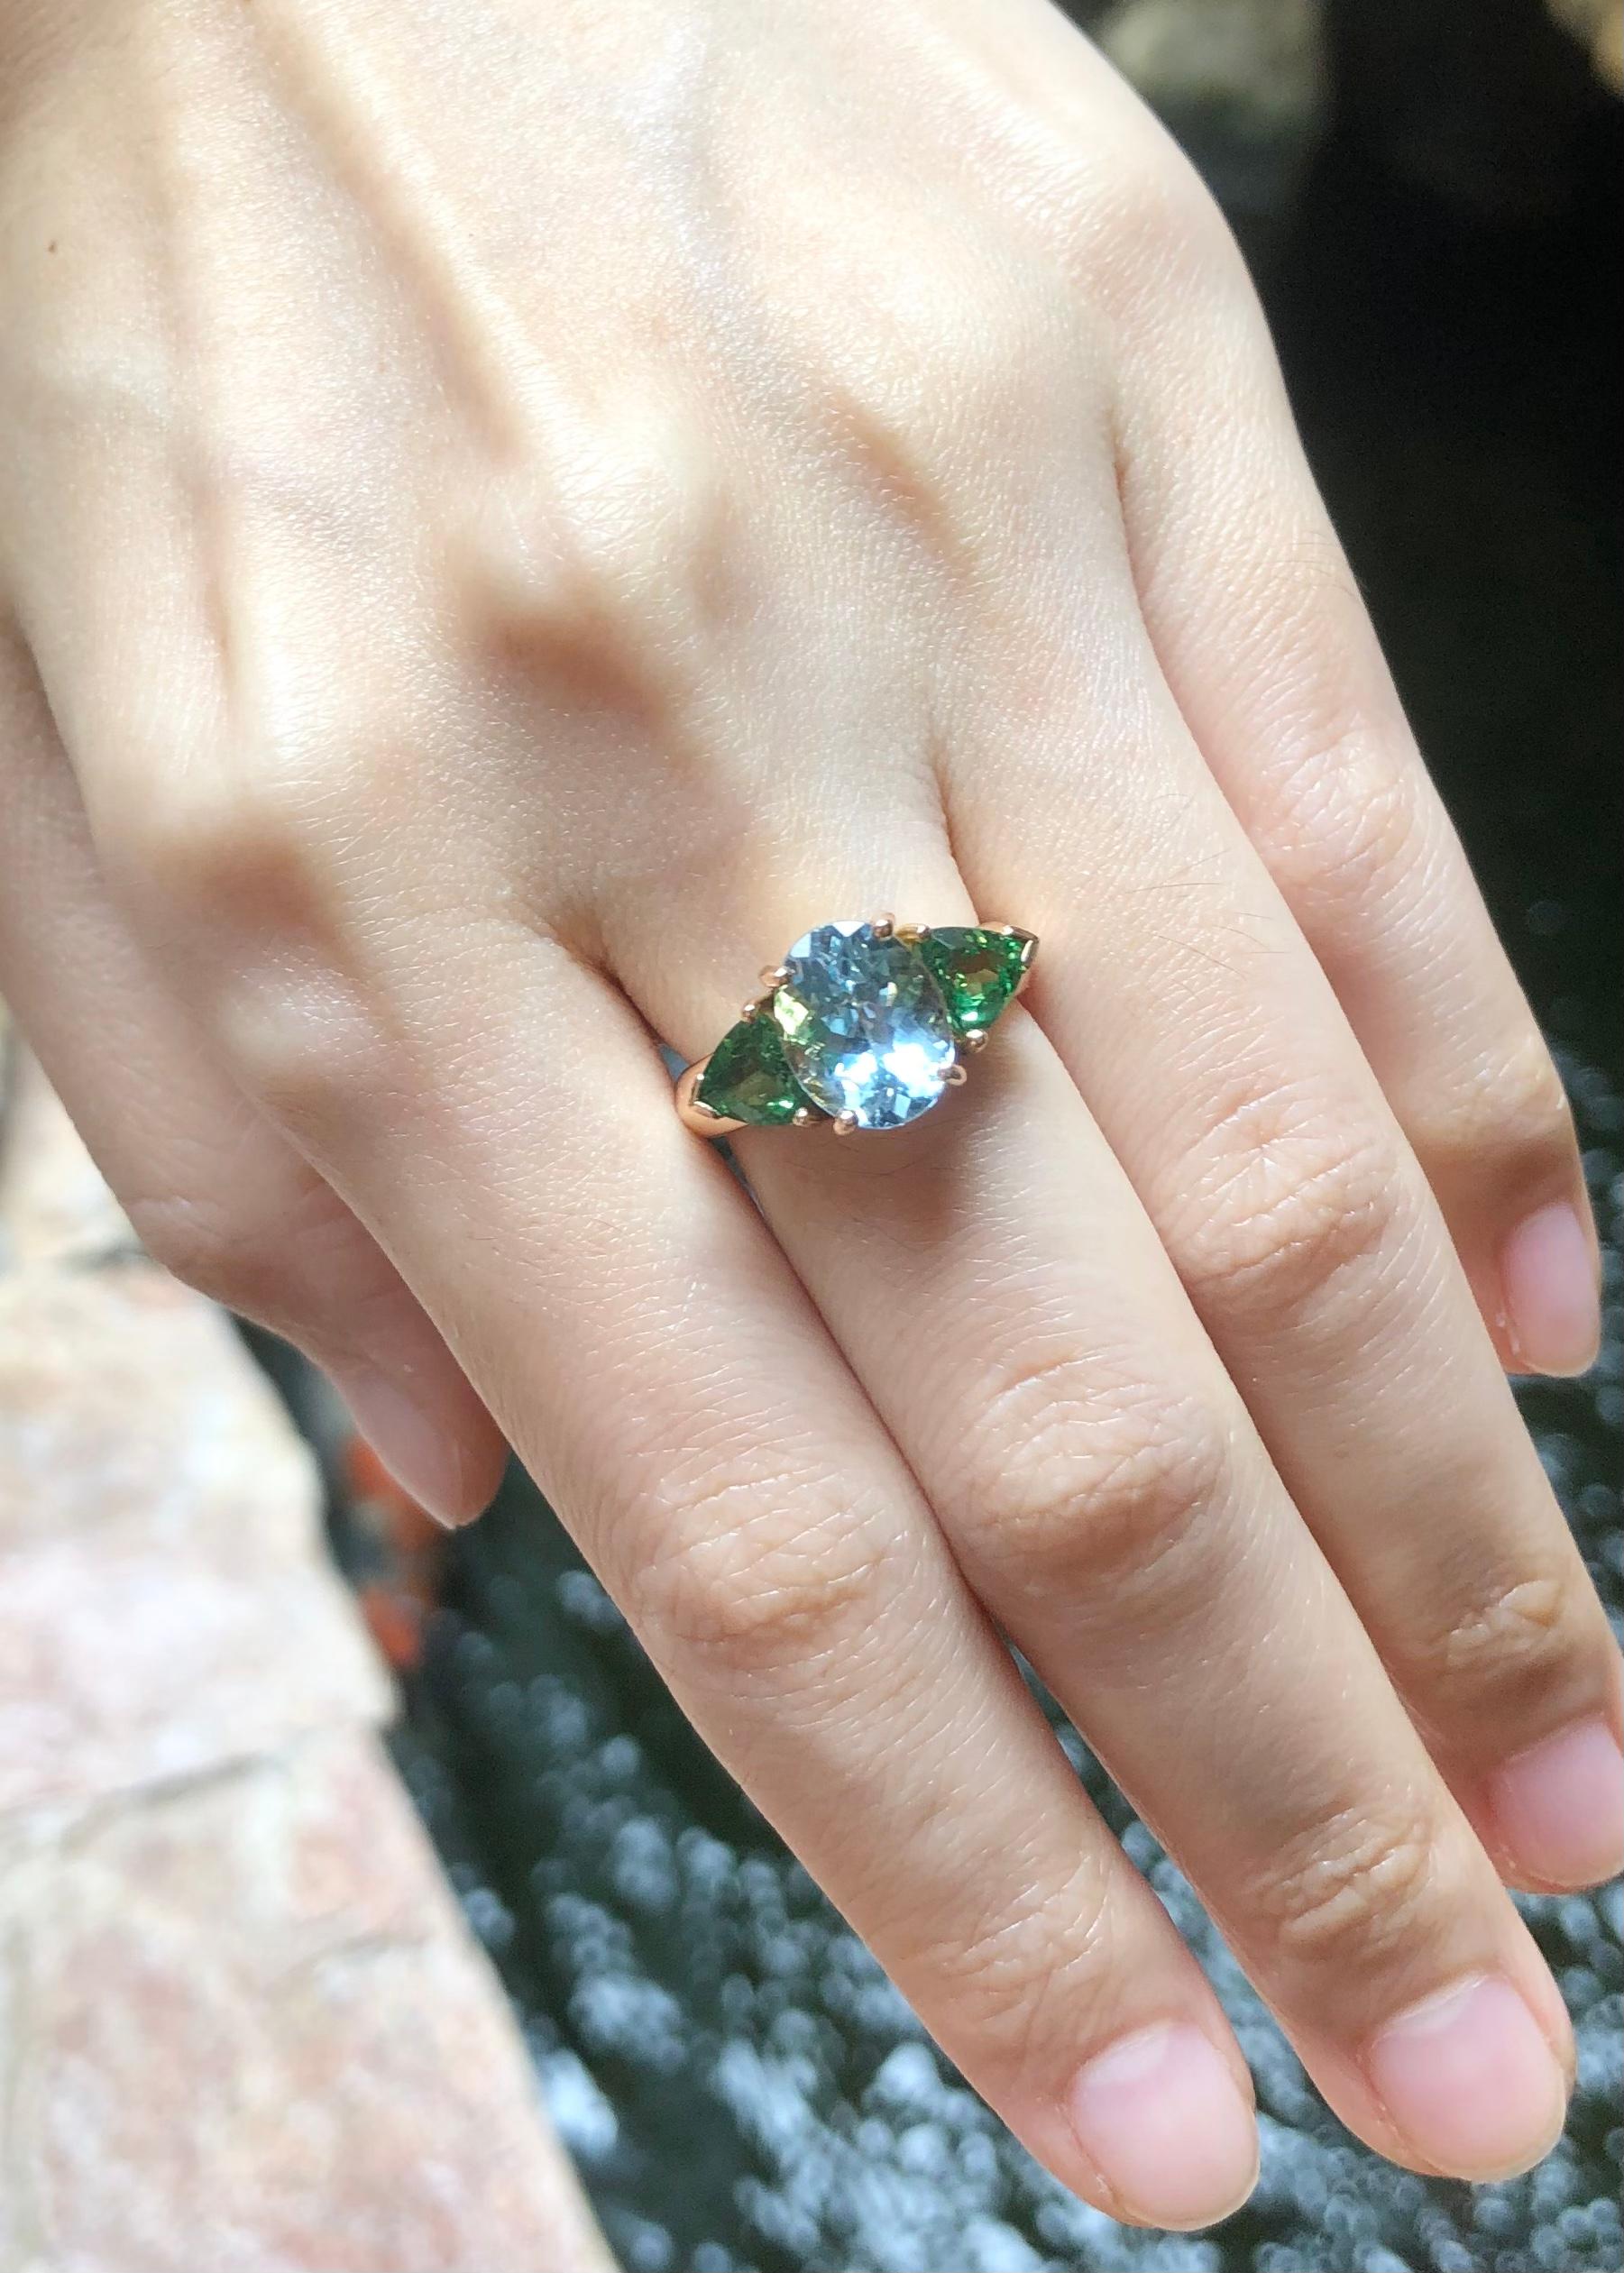 Aquamarine 2.74 carats with Tsavorite 1.31 carats Ring set in 18K Rose Gold Settings

Width:  1.8 cm 
Length: 1.0 cm
Ring Size: 51
Total Weight: 6.01 grams

